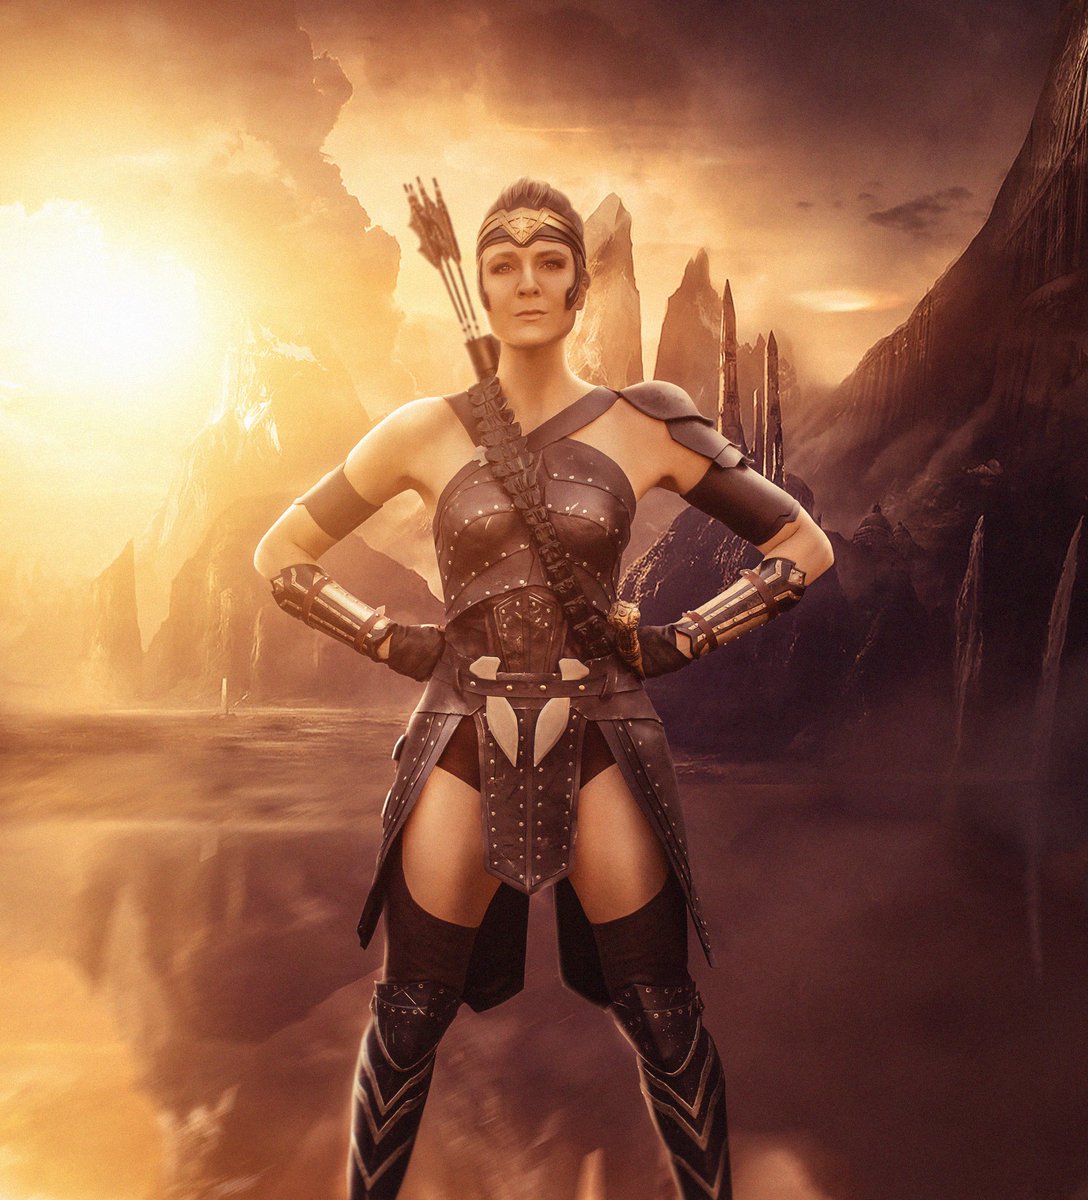 It’s my Birthday!!!???! Here is a friggin fantastic edit by @null_fotografia that I’ve been saving for a good day! I LOVE IT! @WonderWomanFilm @RealRobinWright giving me al the General Antiope moods there ever was. https://t.co/G3JzBHx7WI